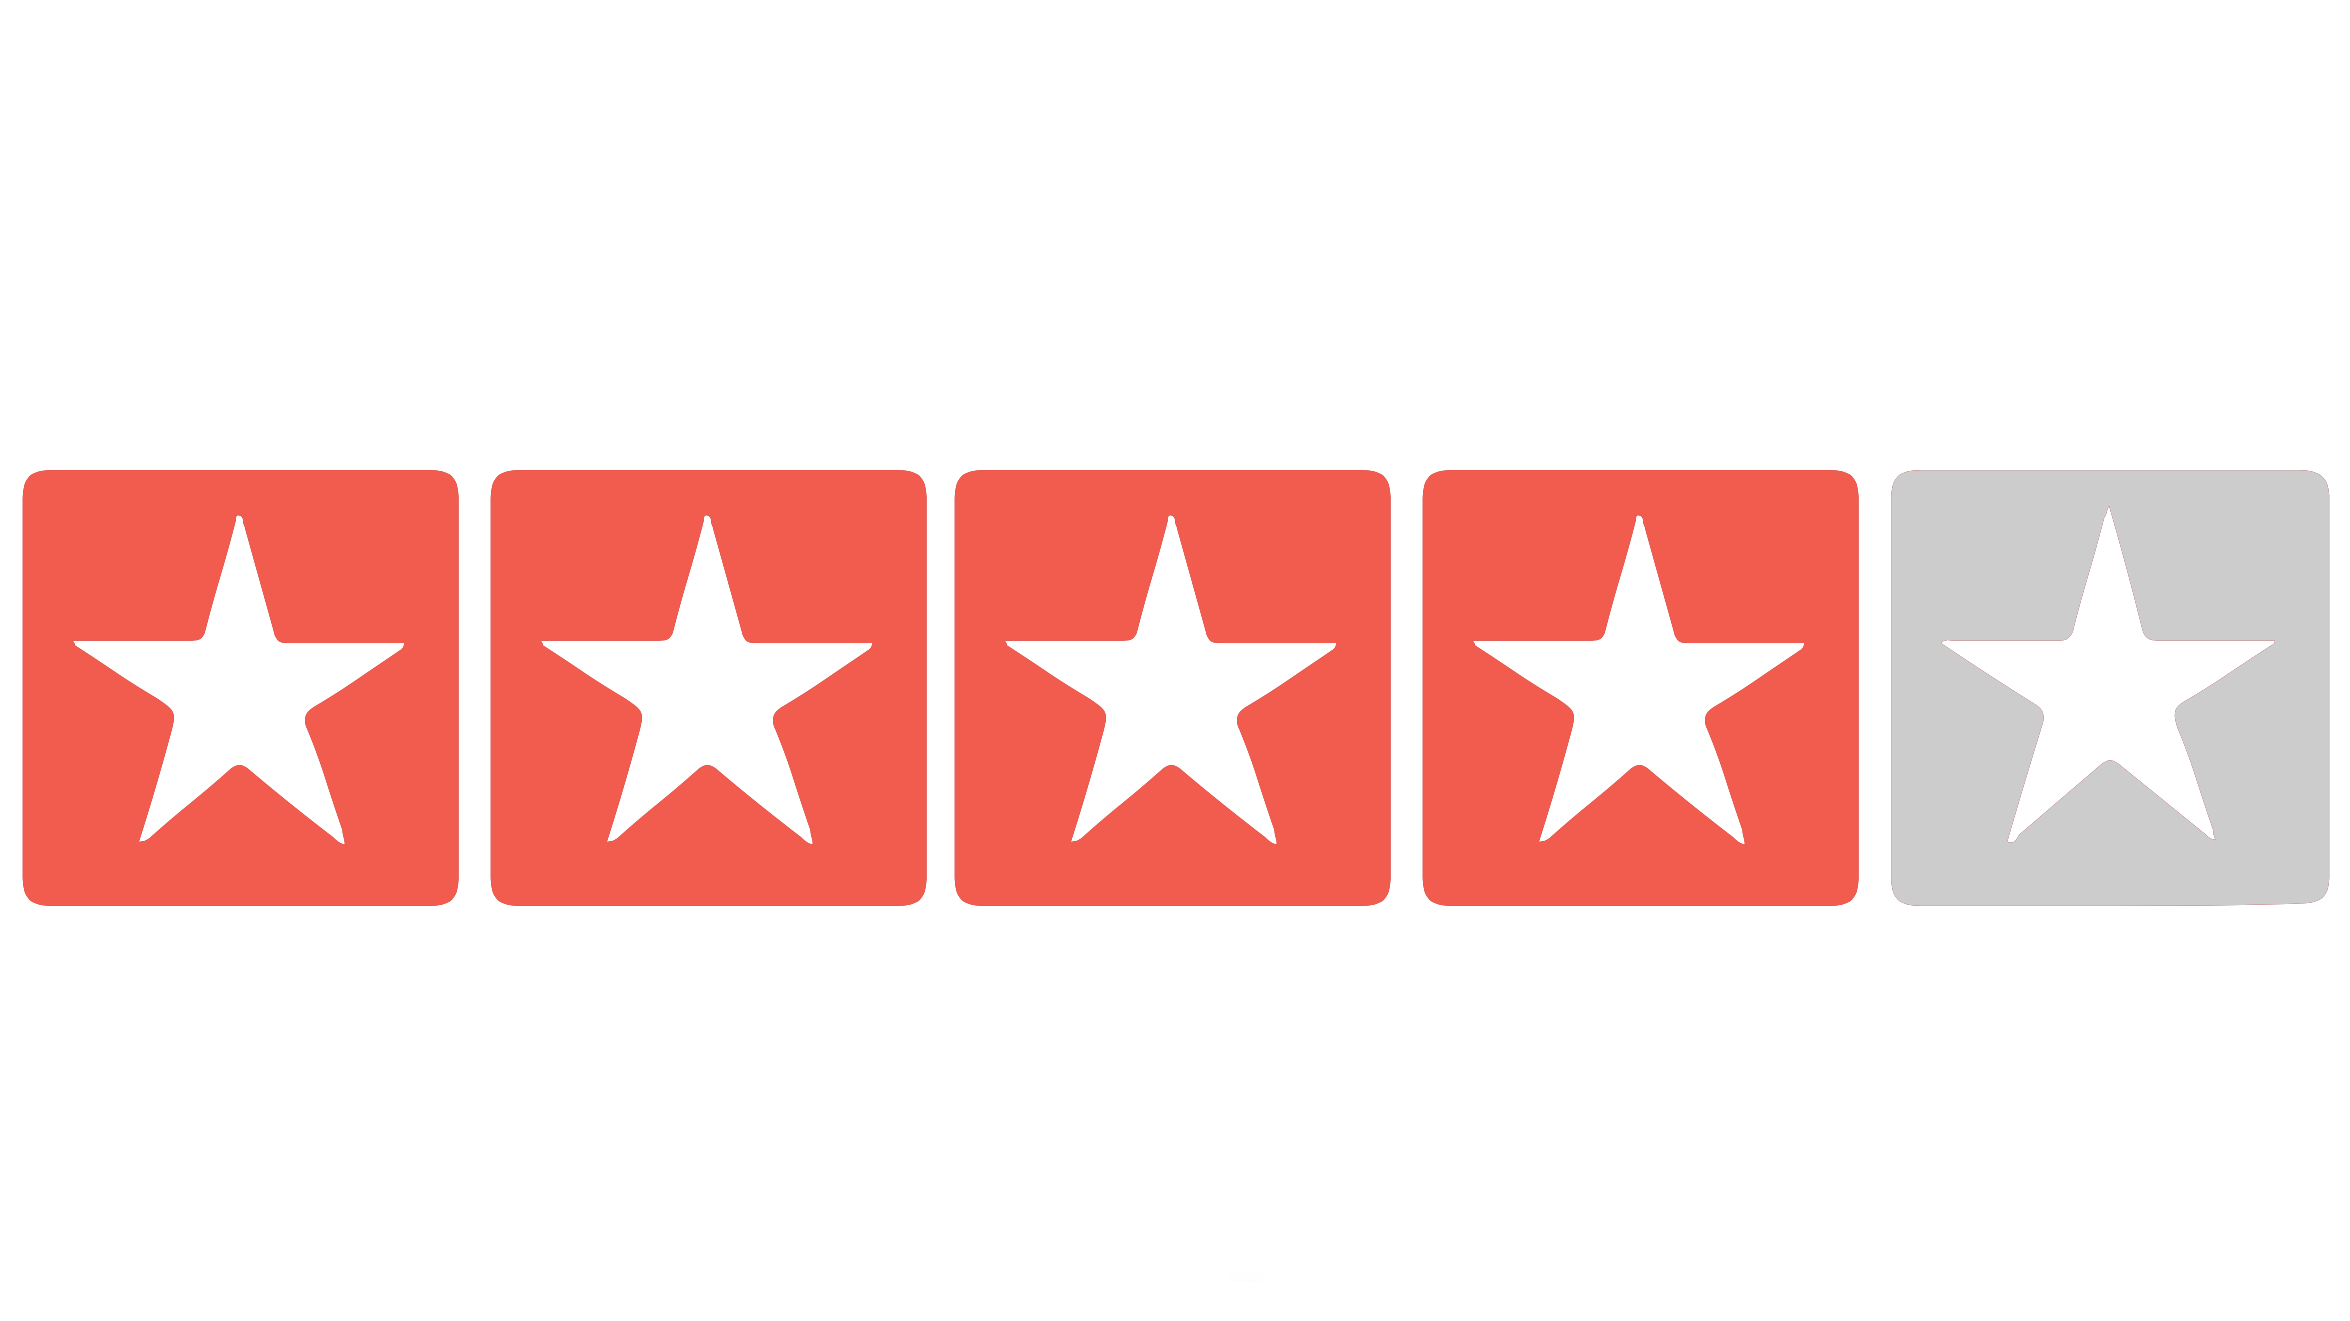 Chris G’s Best Yelp Reviews: 99 Cents Only Store – 4/5 Stars